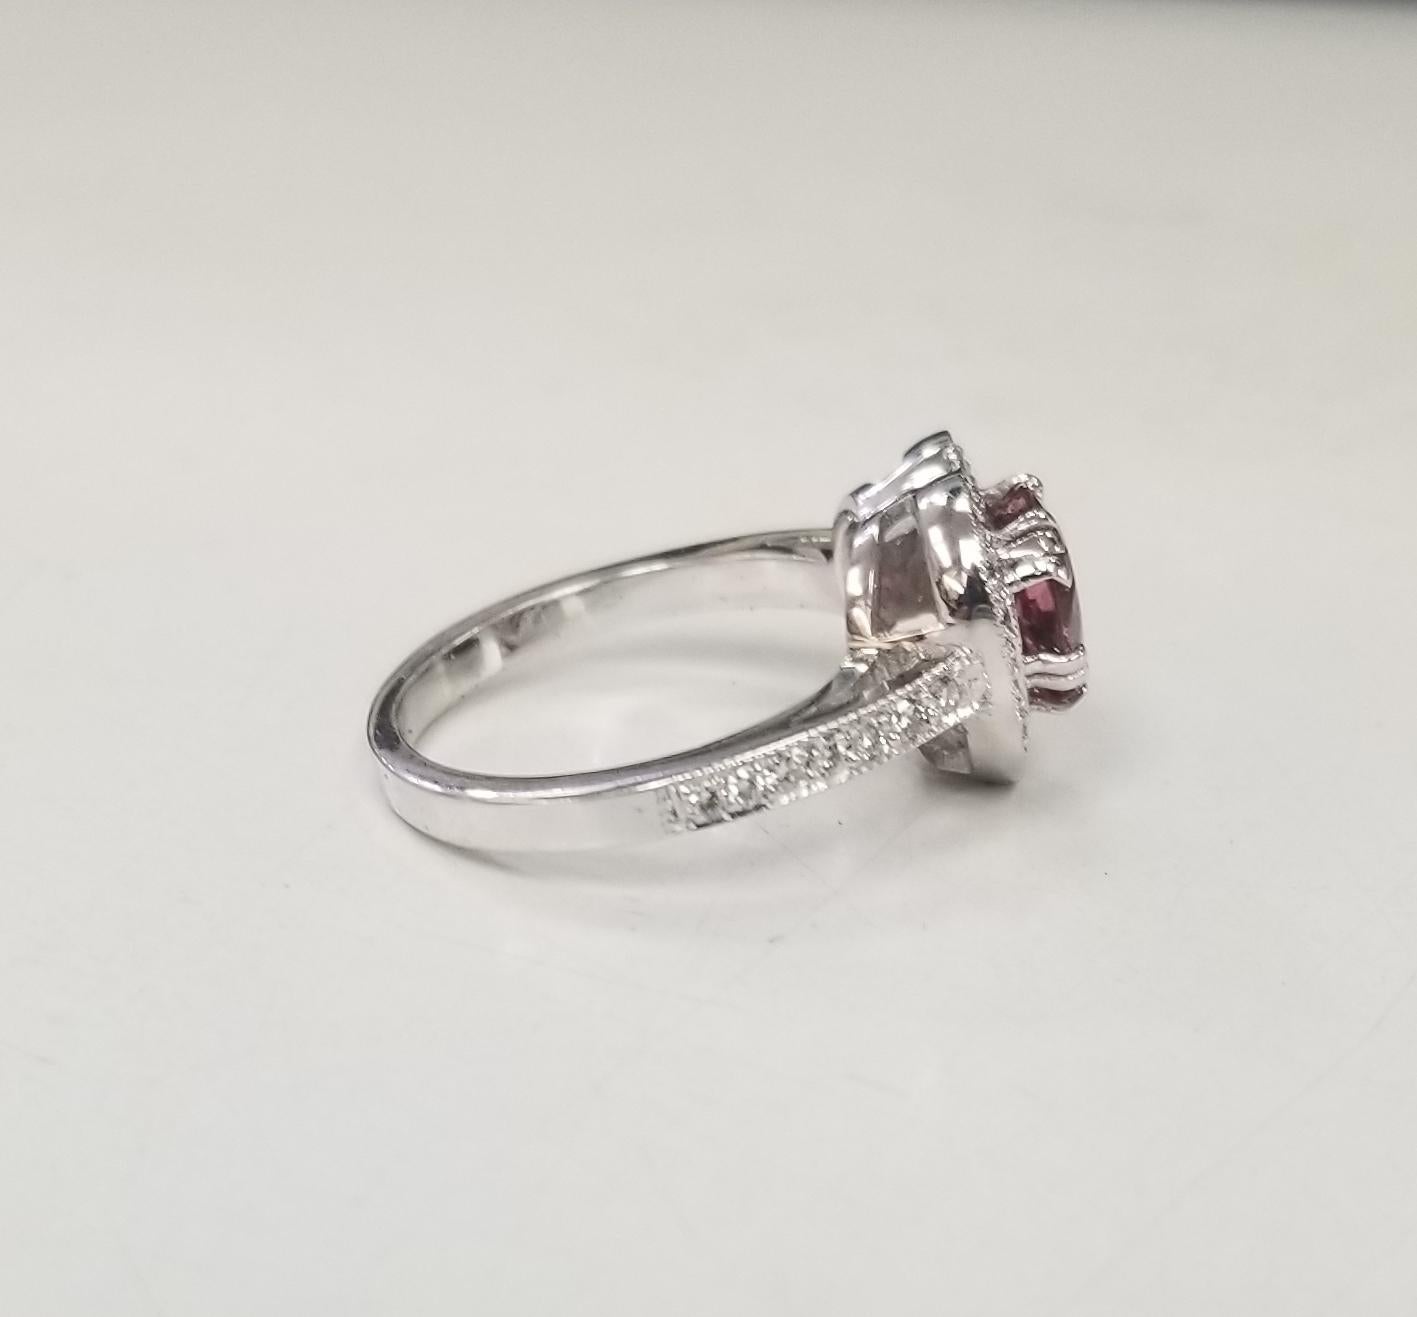 Contemporary 14k white gold pink tourmaline and diamond halo ring